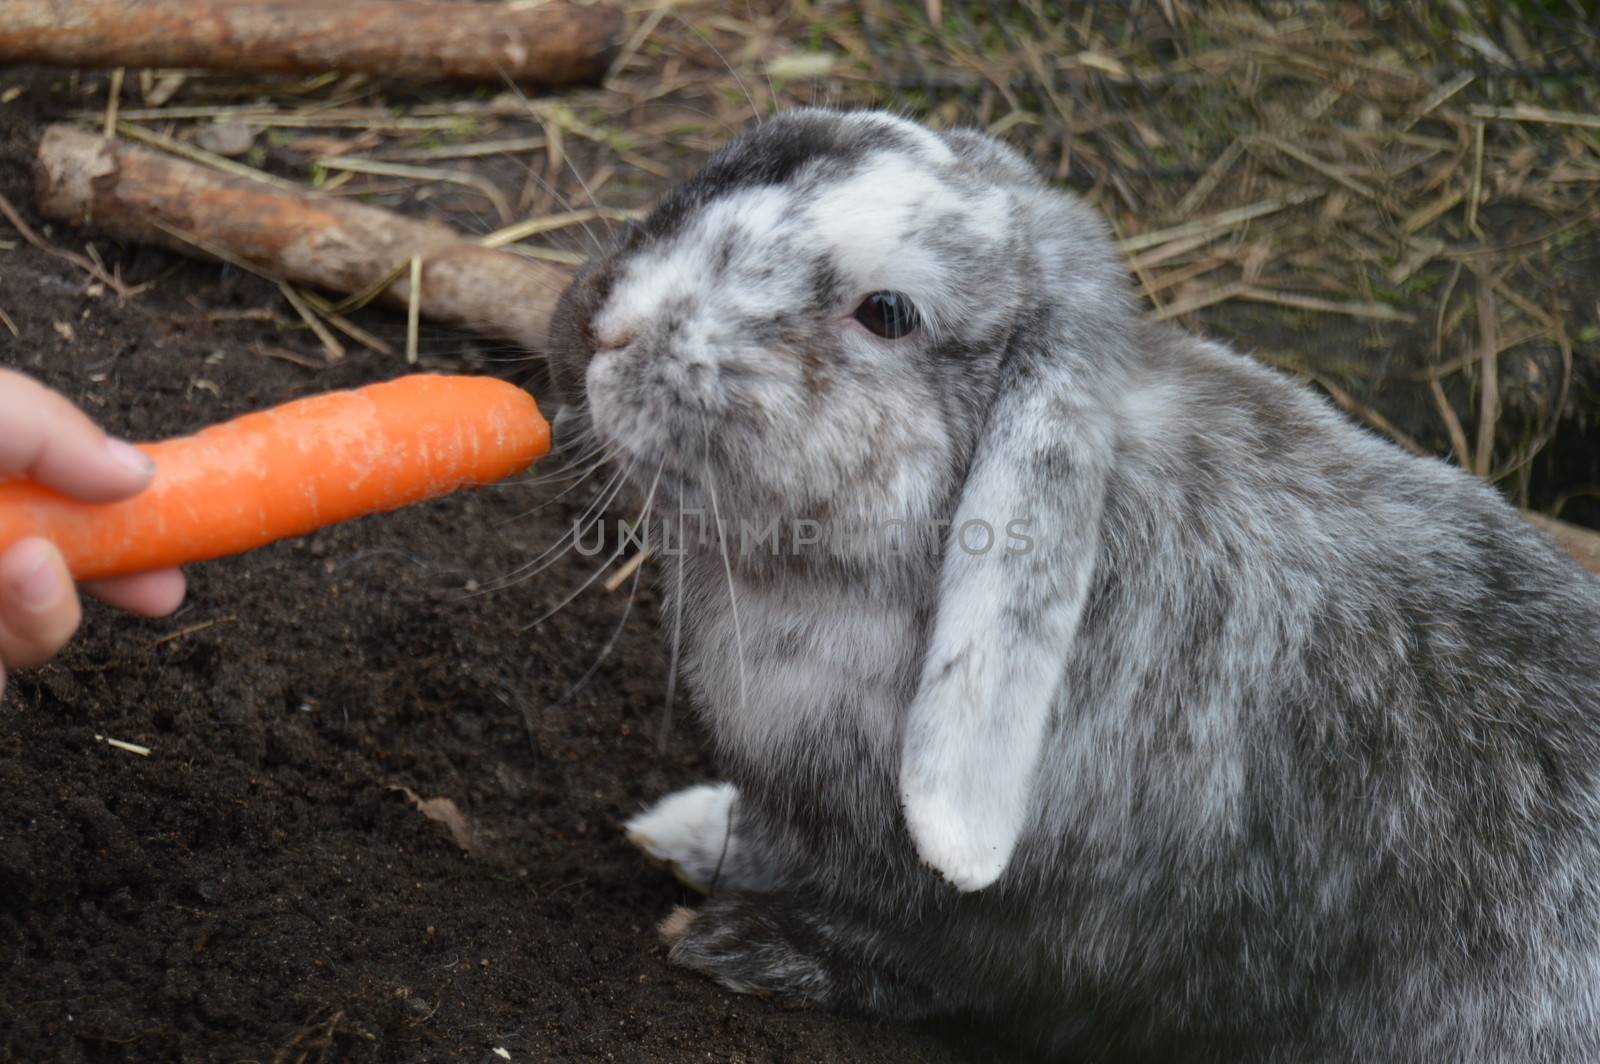 Holland Lop eating carrot by Meretemy@hotmail.com